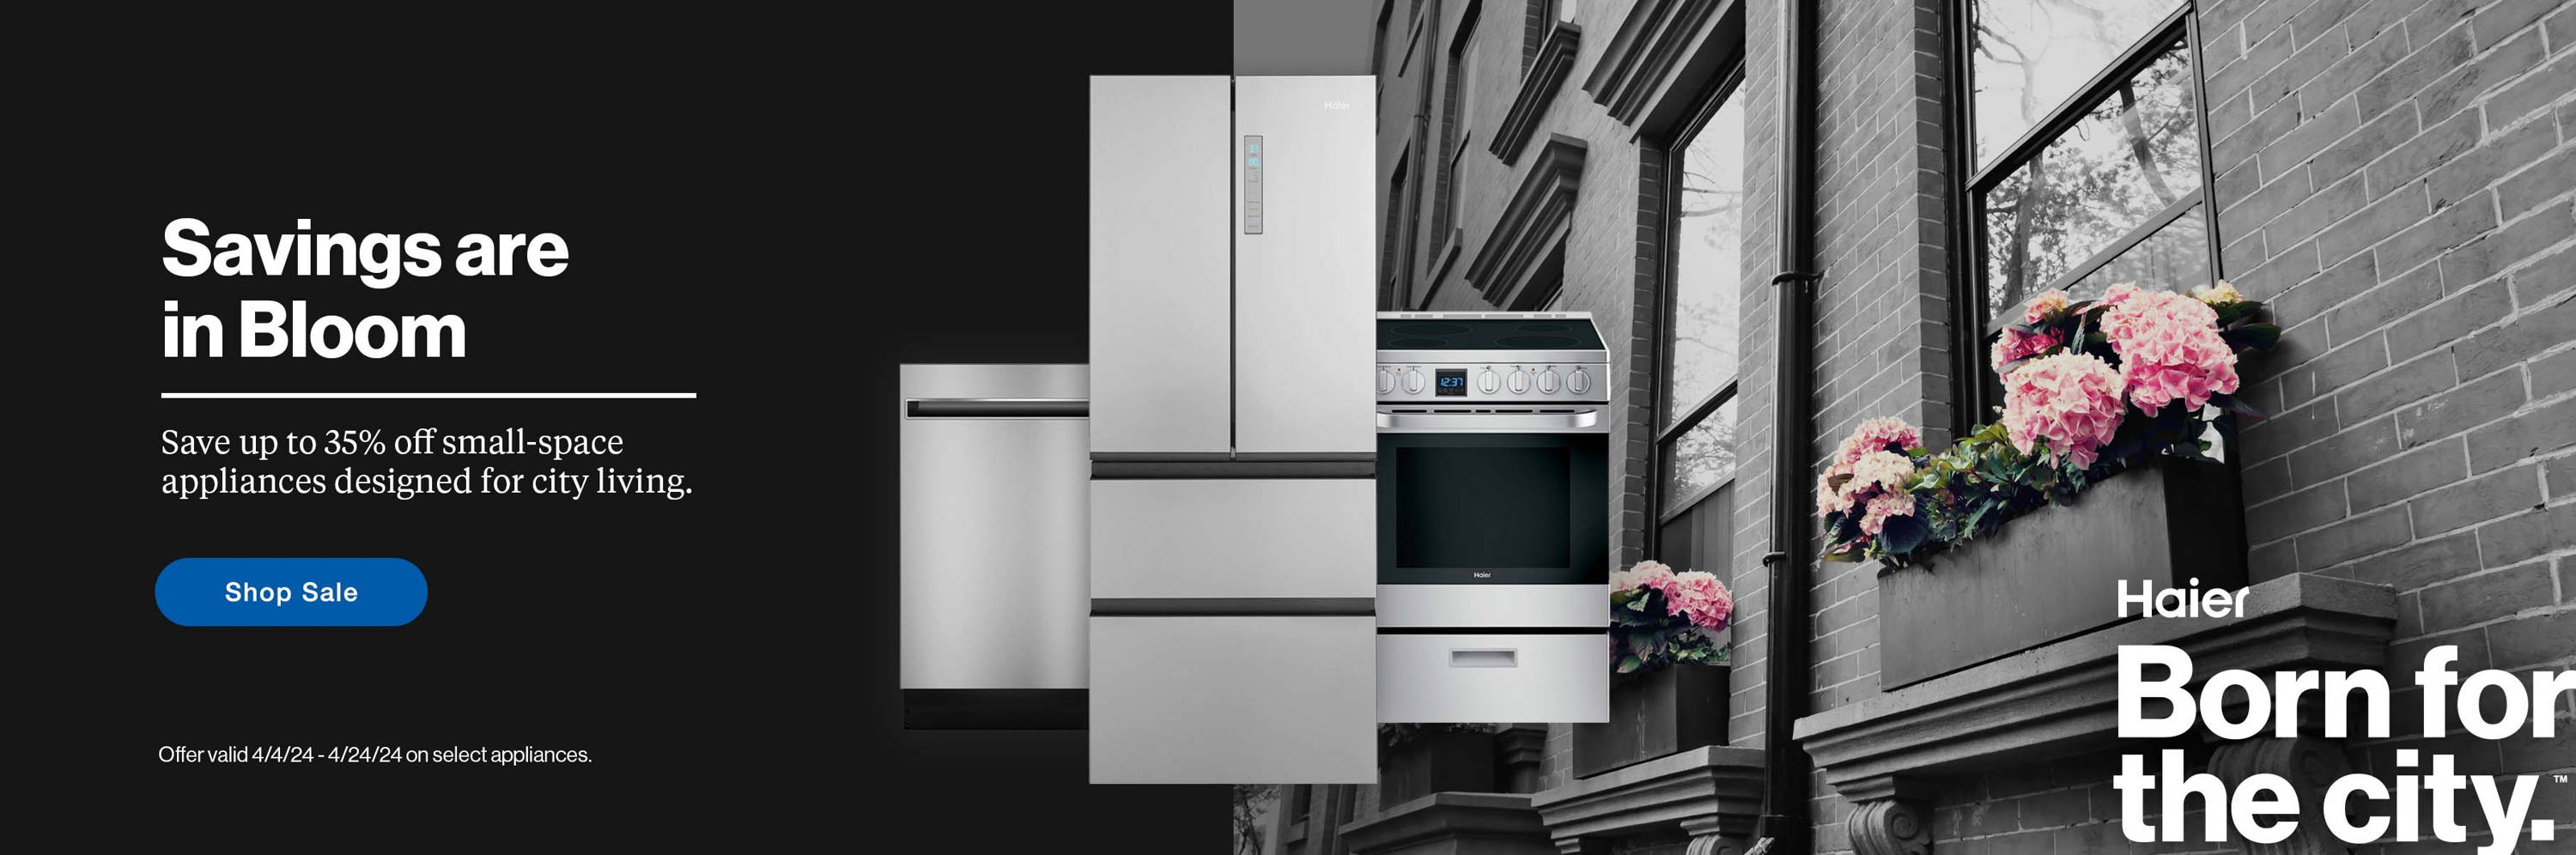  Spring into Savings. Save up to 35% off small-space appliances designed for city living. Haier small-space kitchen appliances layered over a background image of a downtown building with fresh spring flowers in large window garden boxes.